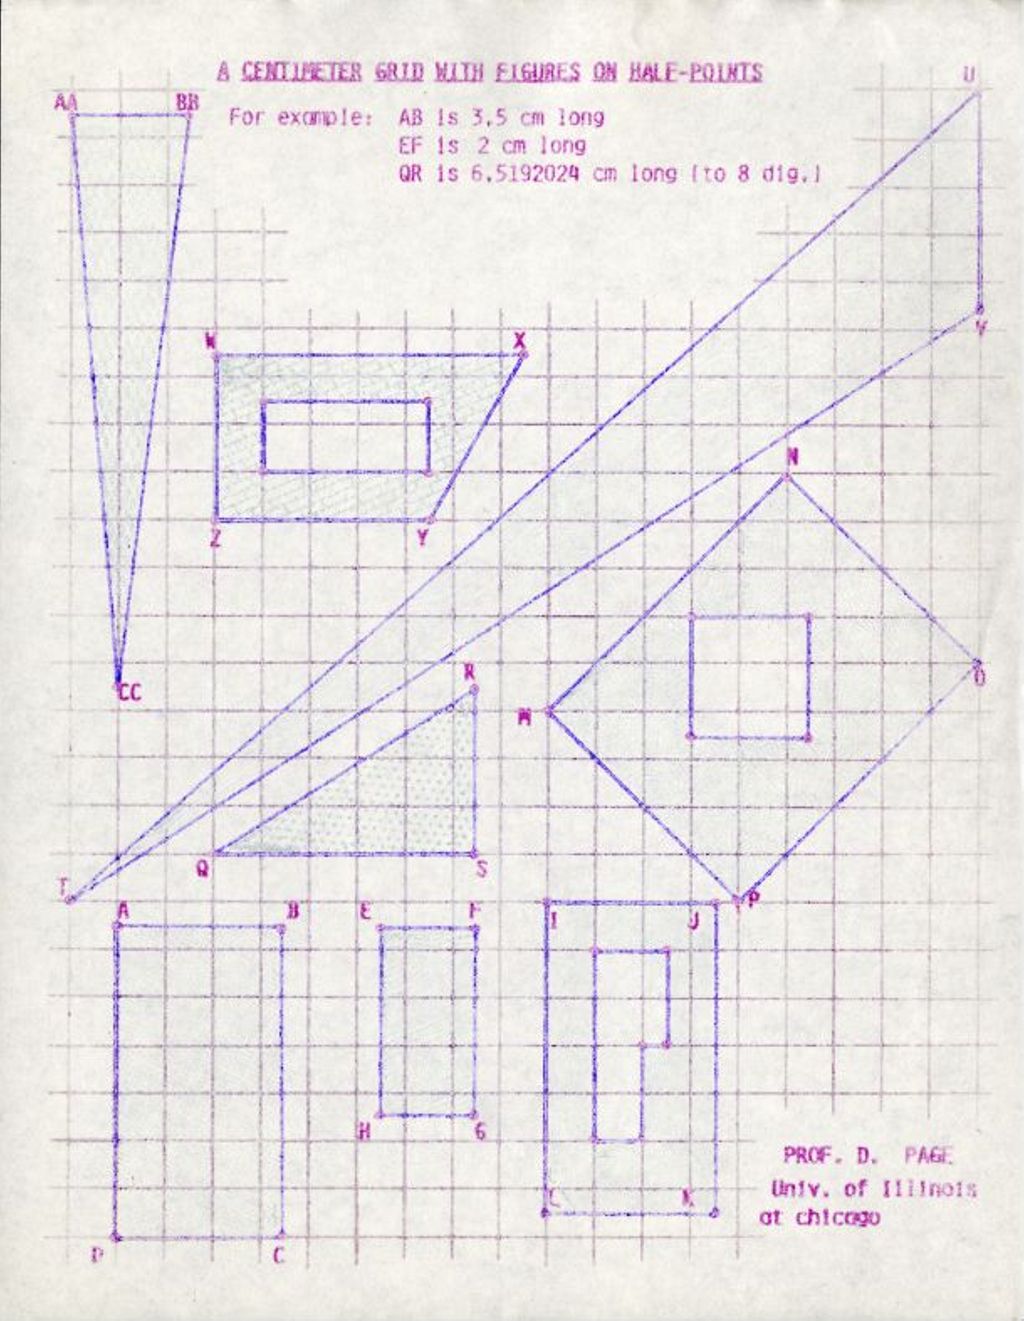 Miniature of A Centimeter Grid with Figures on Half-Points